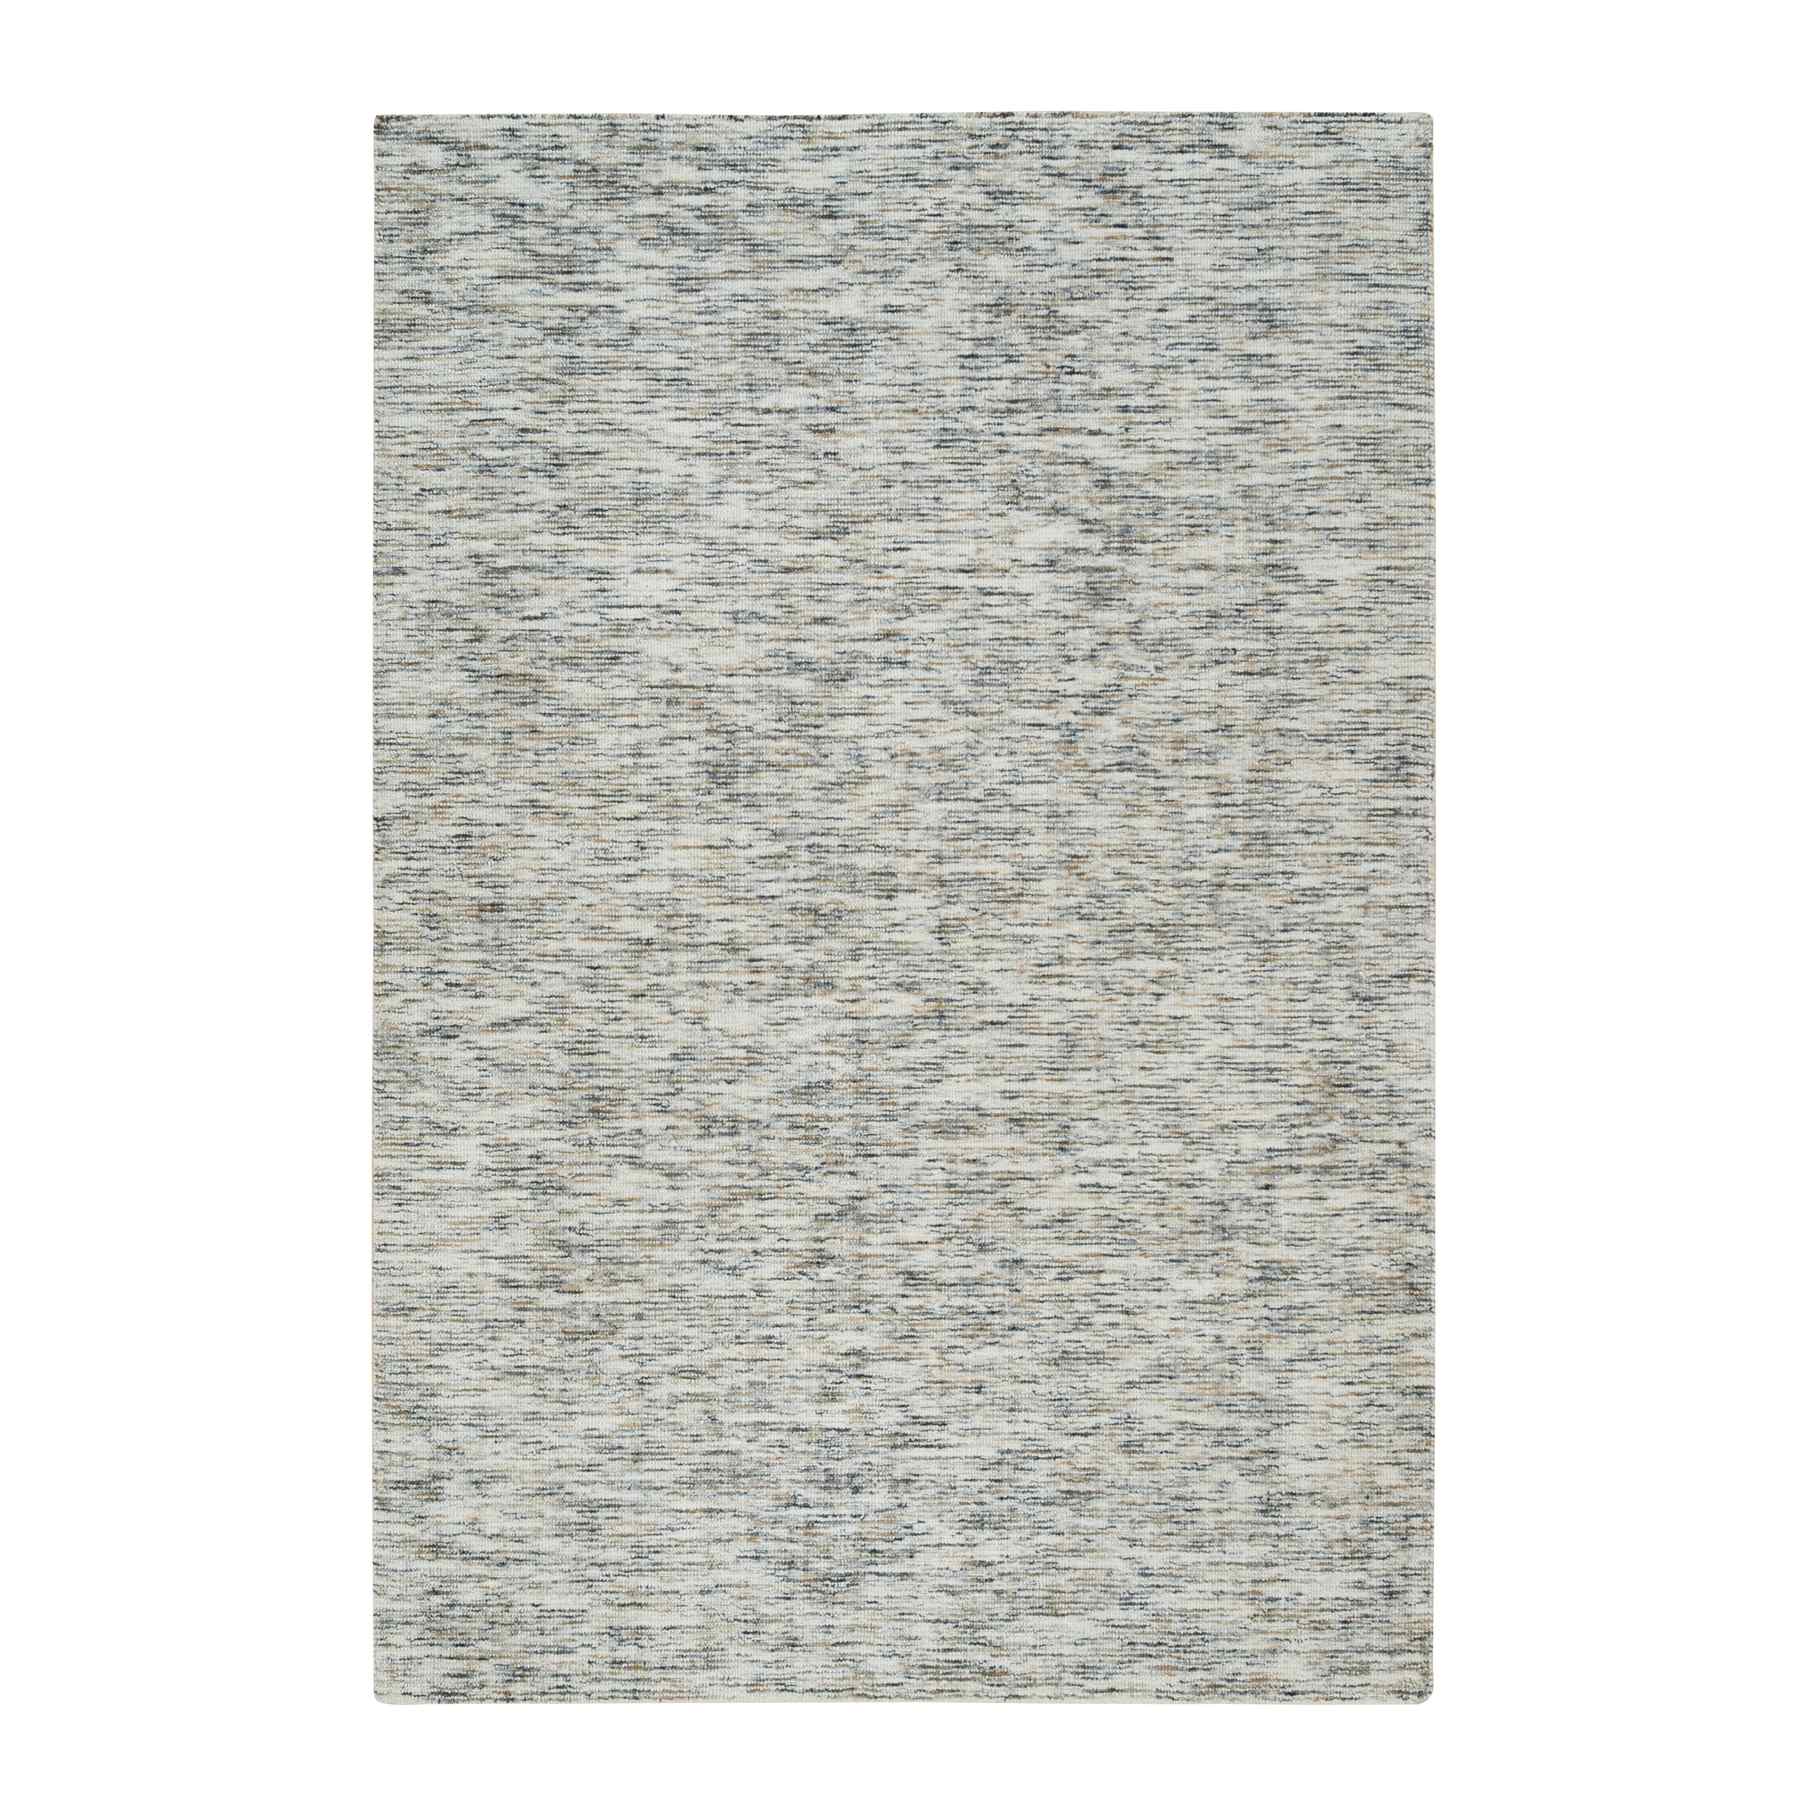 Earth Tone Colors, Pure Wool, Hand Loomed, Modern Striae Design, Soft to the Touch Oriental Rug